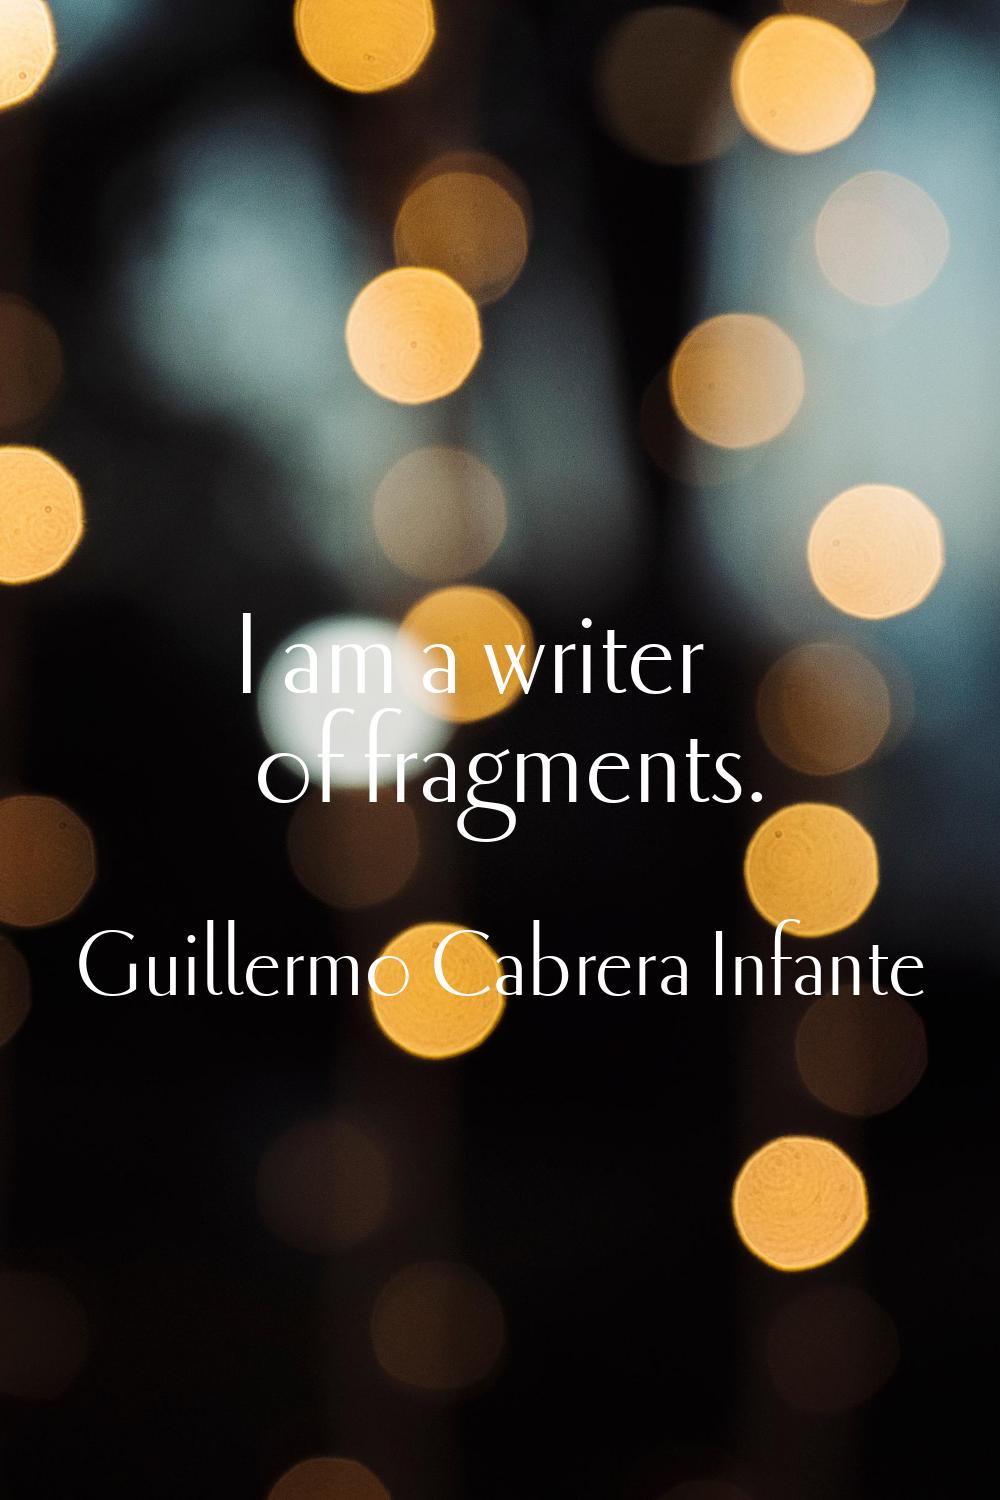 I am a writer of fragments.